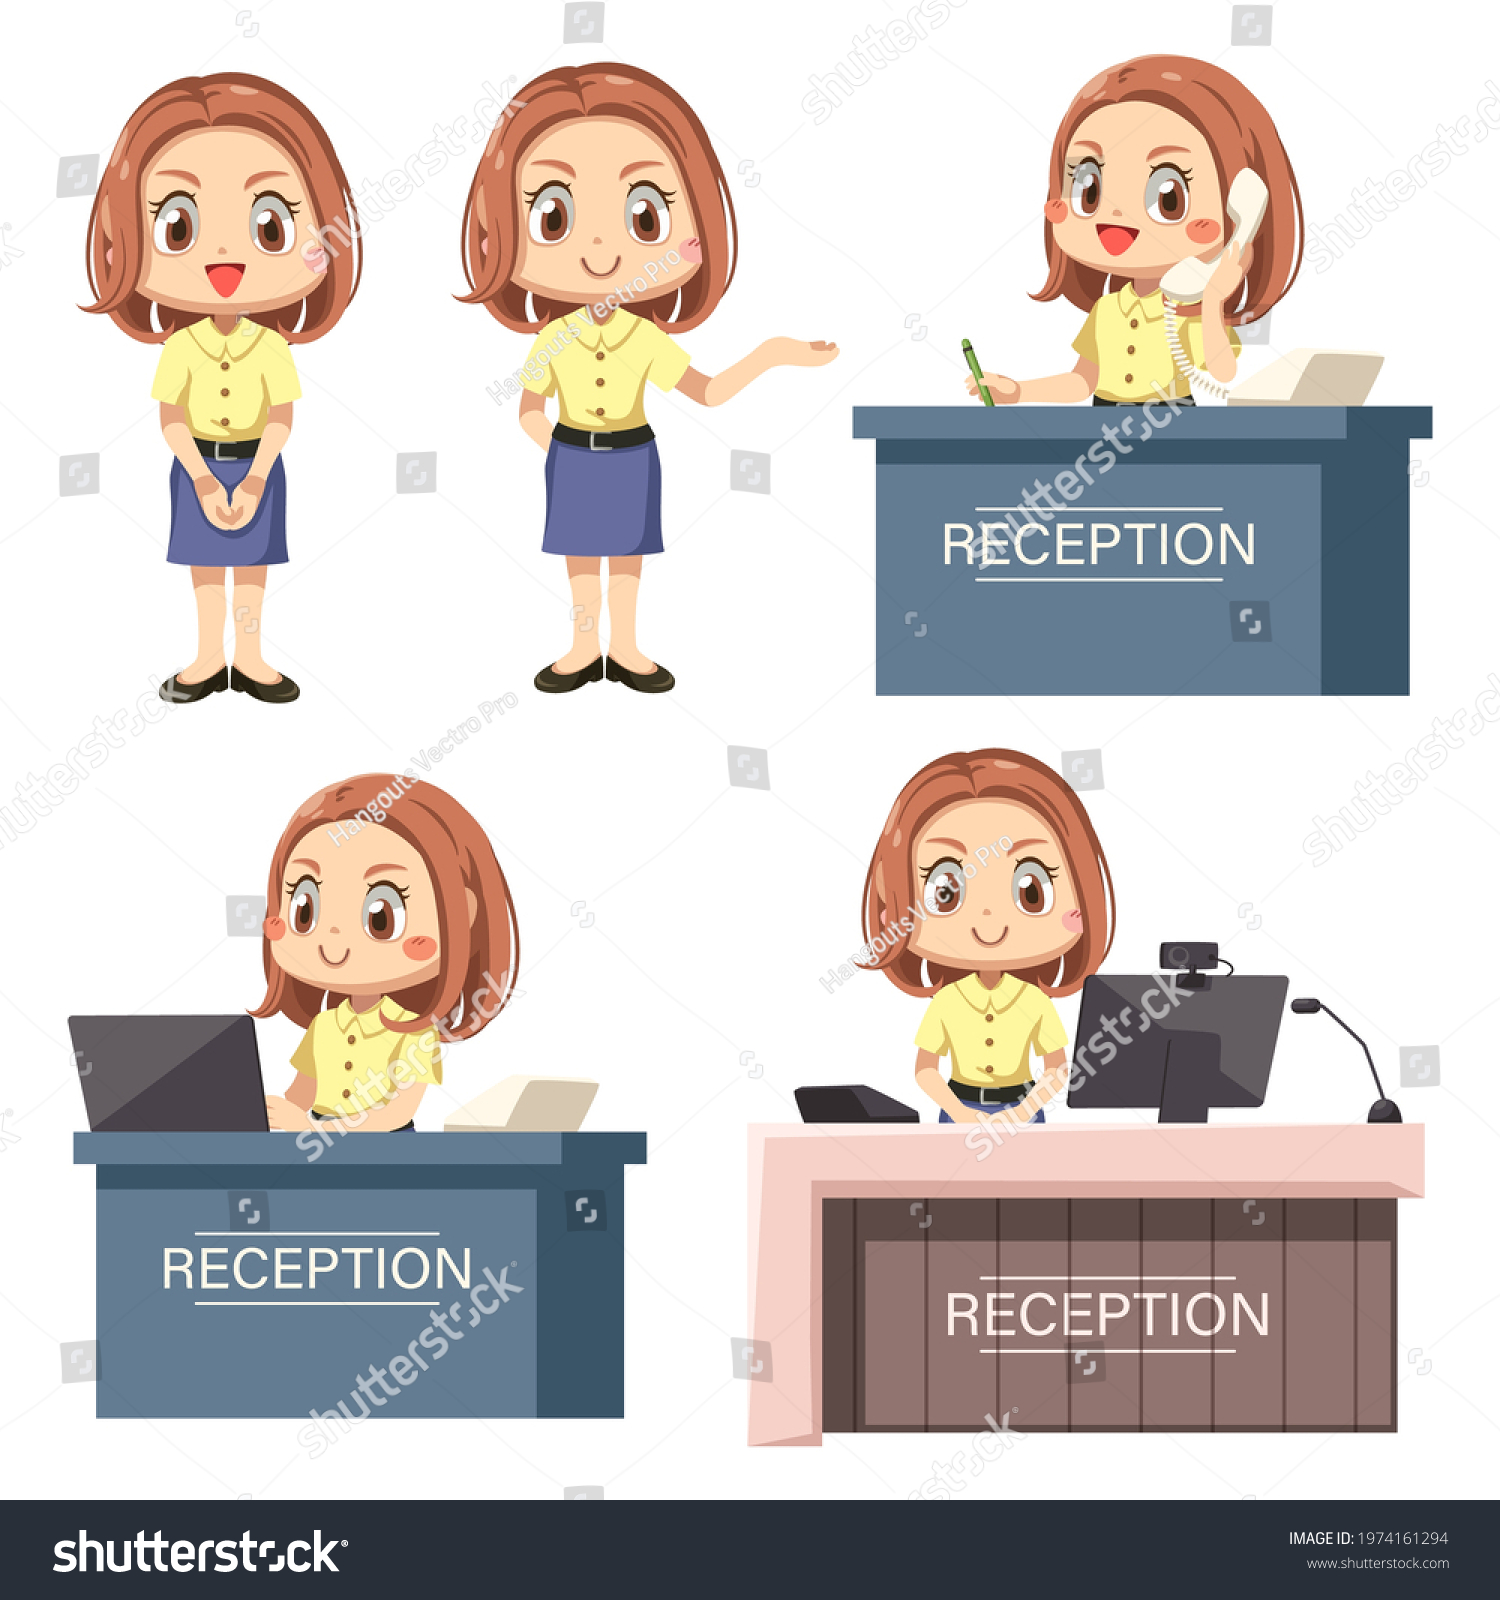 Young Woman Receptionist Stands Reception Desk Stock Vector Royalty Free 1974161294 Shutterstock 5672